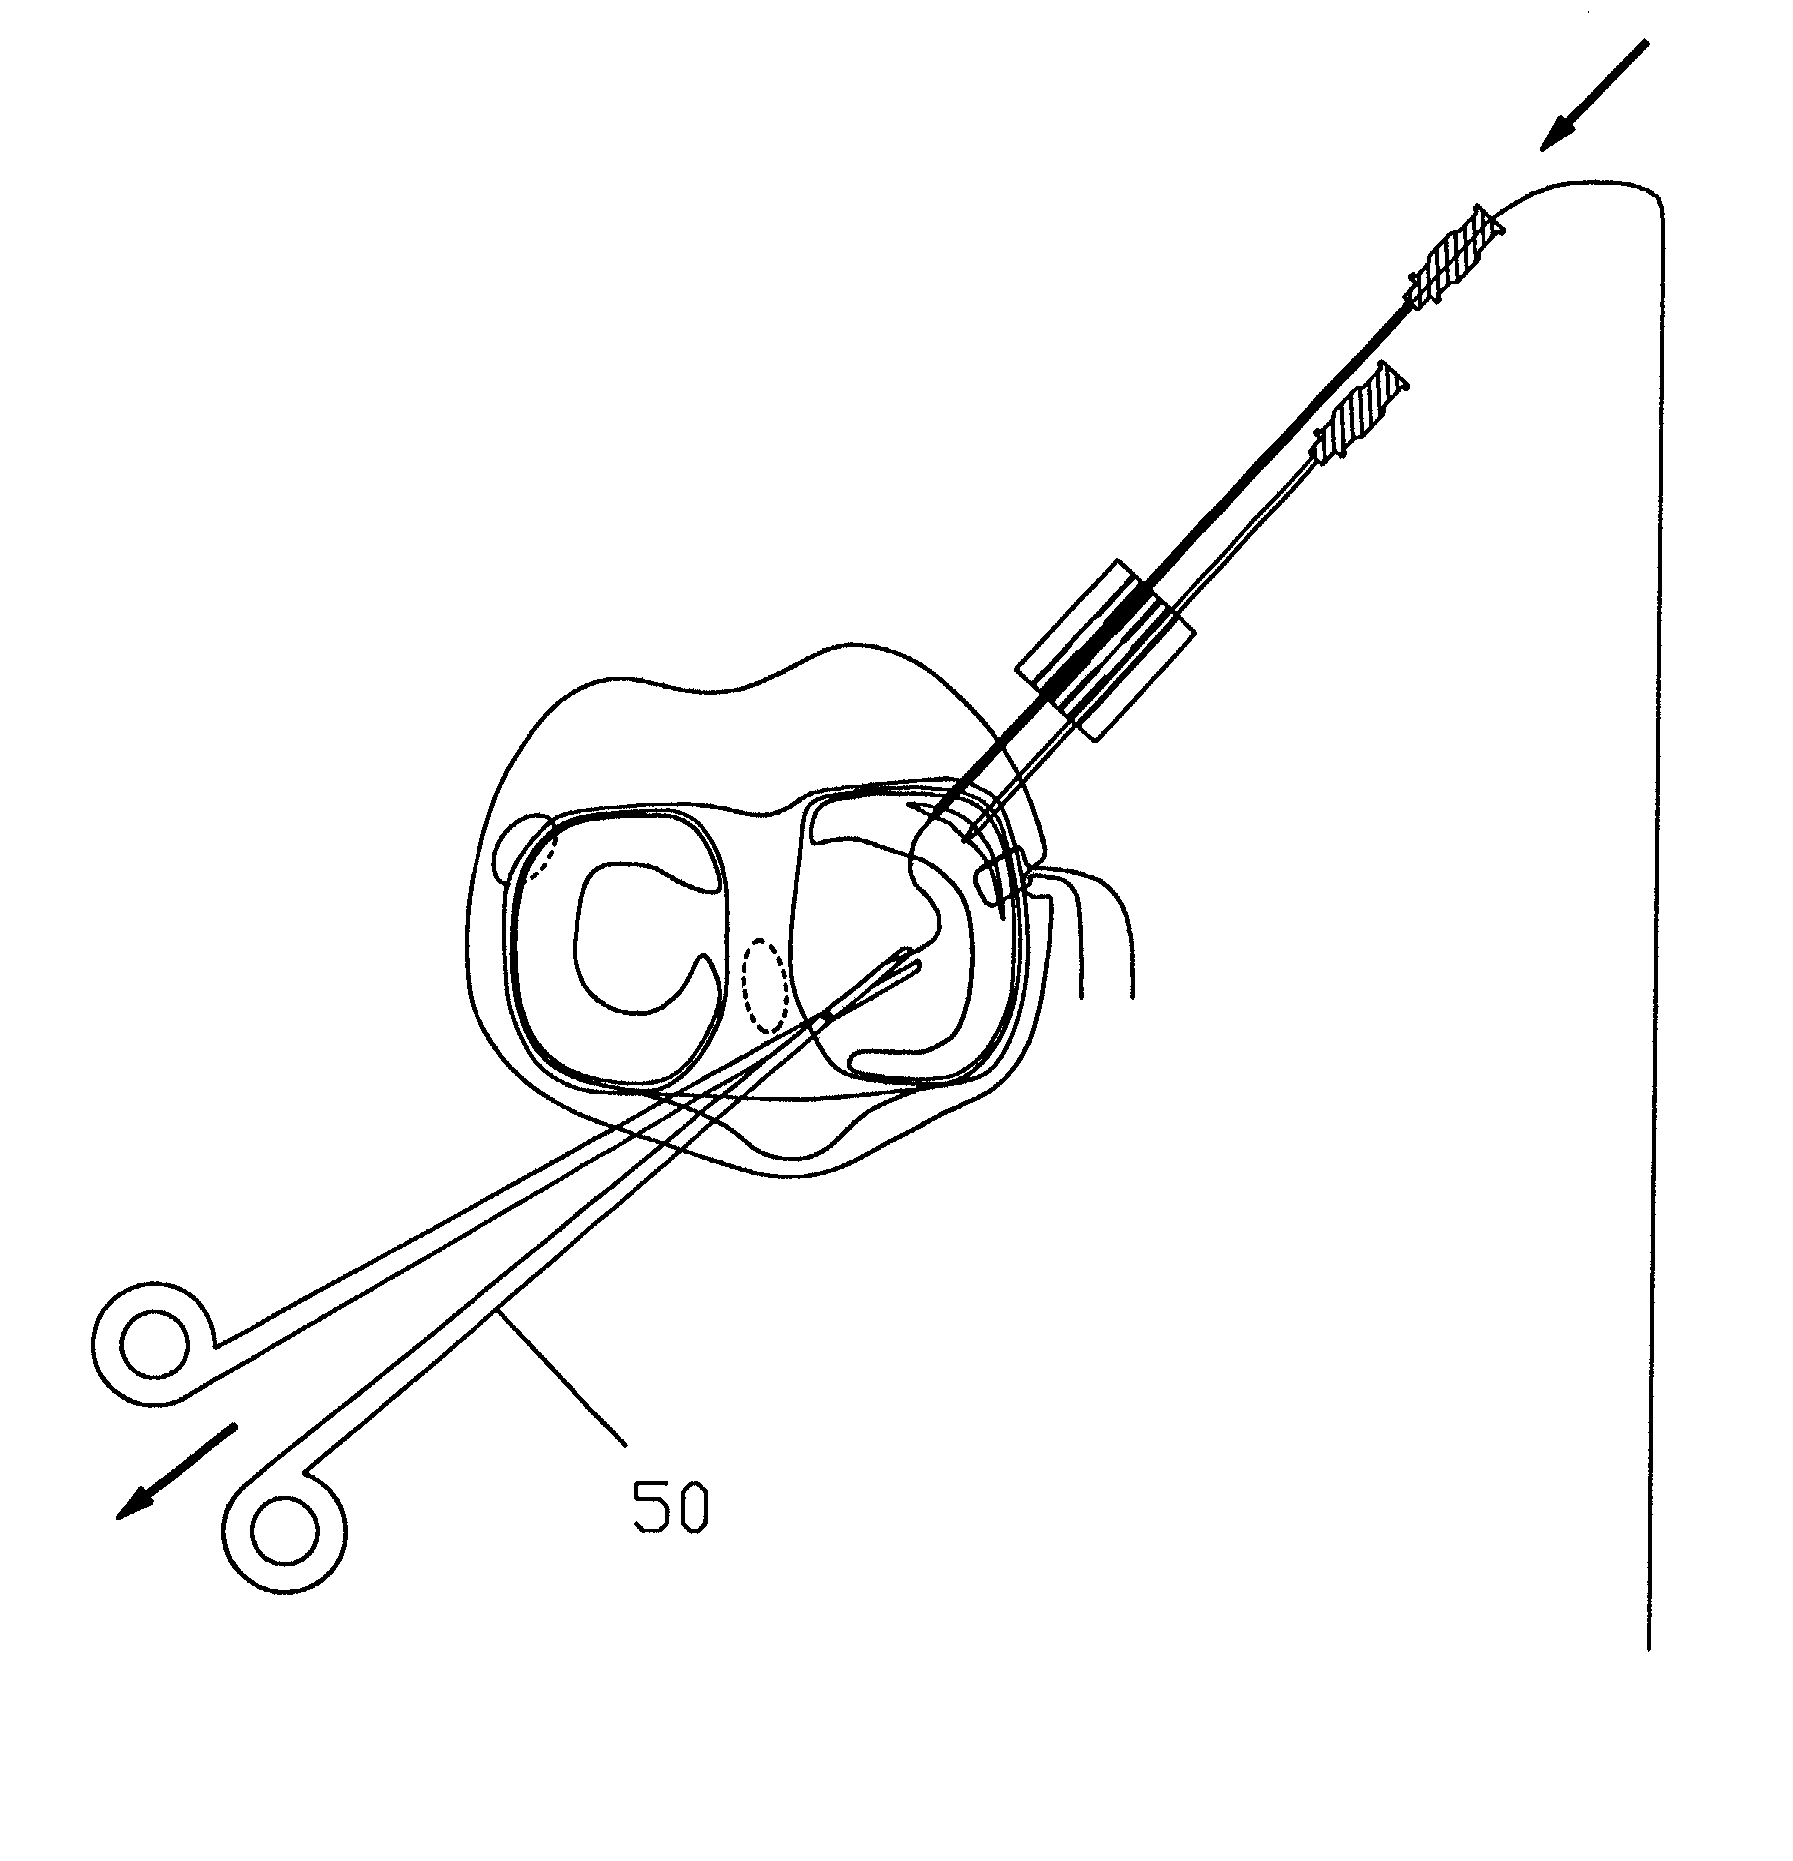 Surgical repair kit and its method of use